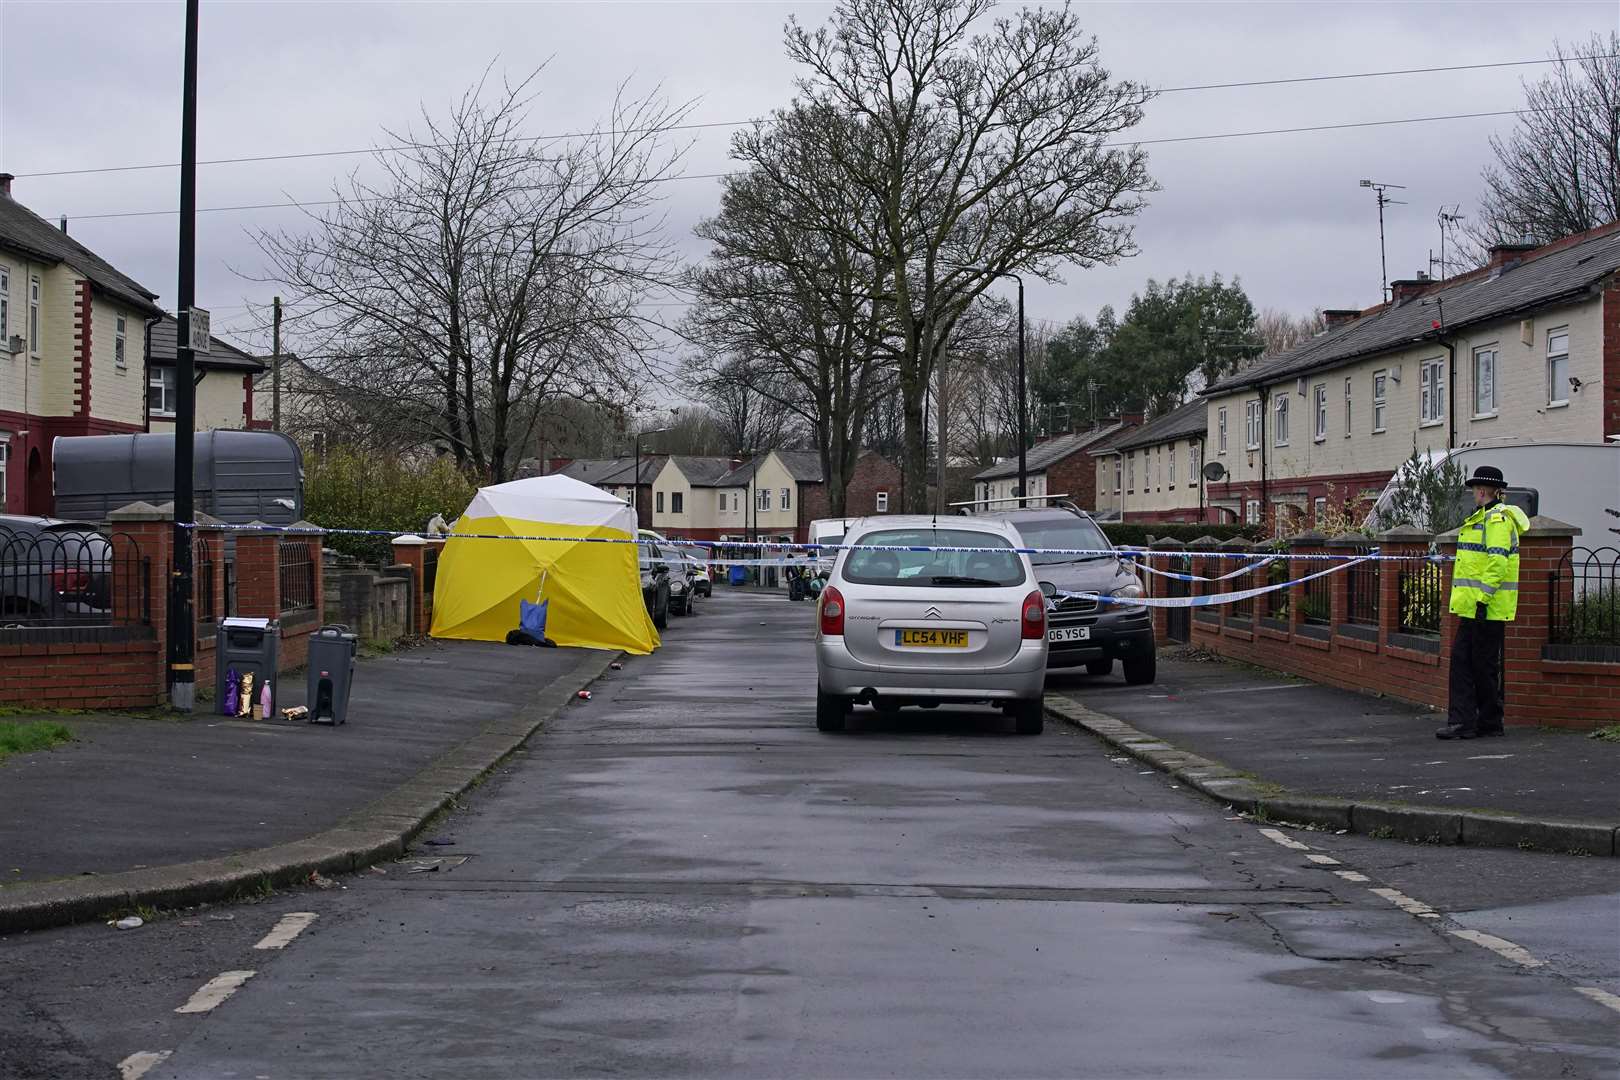 A forensic tent on Thirlmere Avenue in Stretford, Manchester, near to where a 16-year-old boy was fatally stabbed (Peter Byrne/PA)